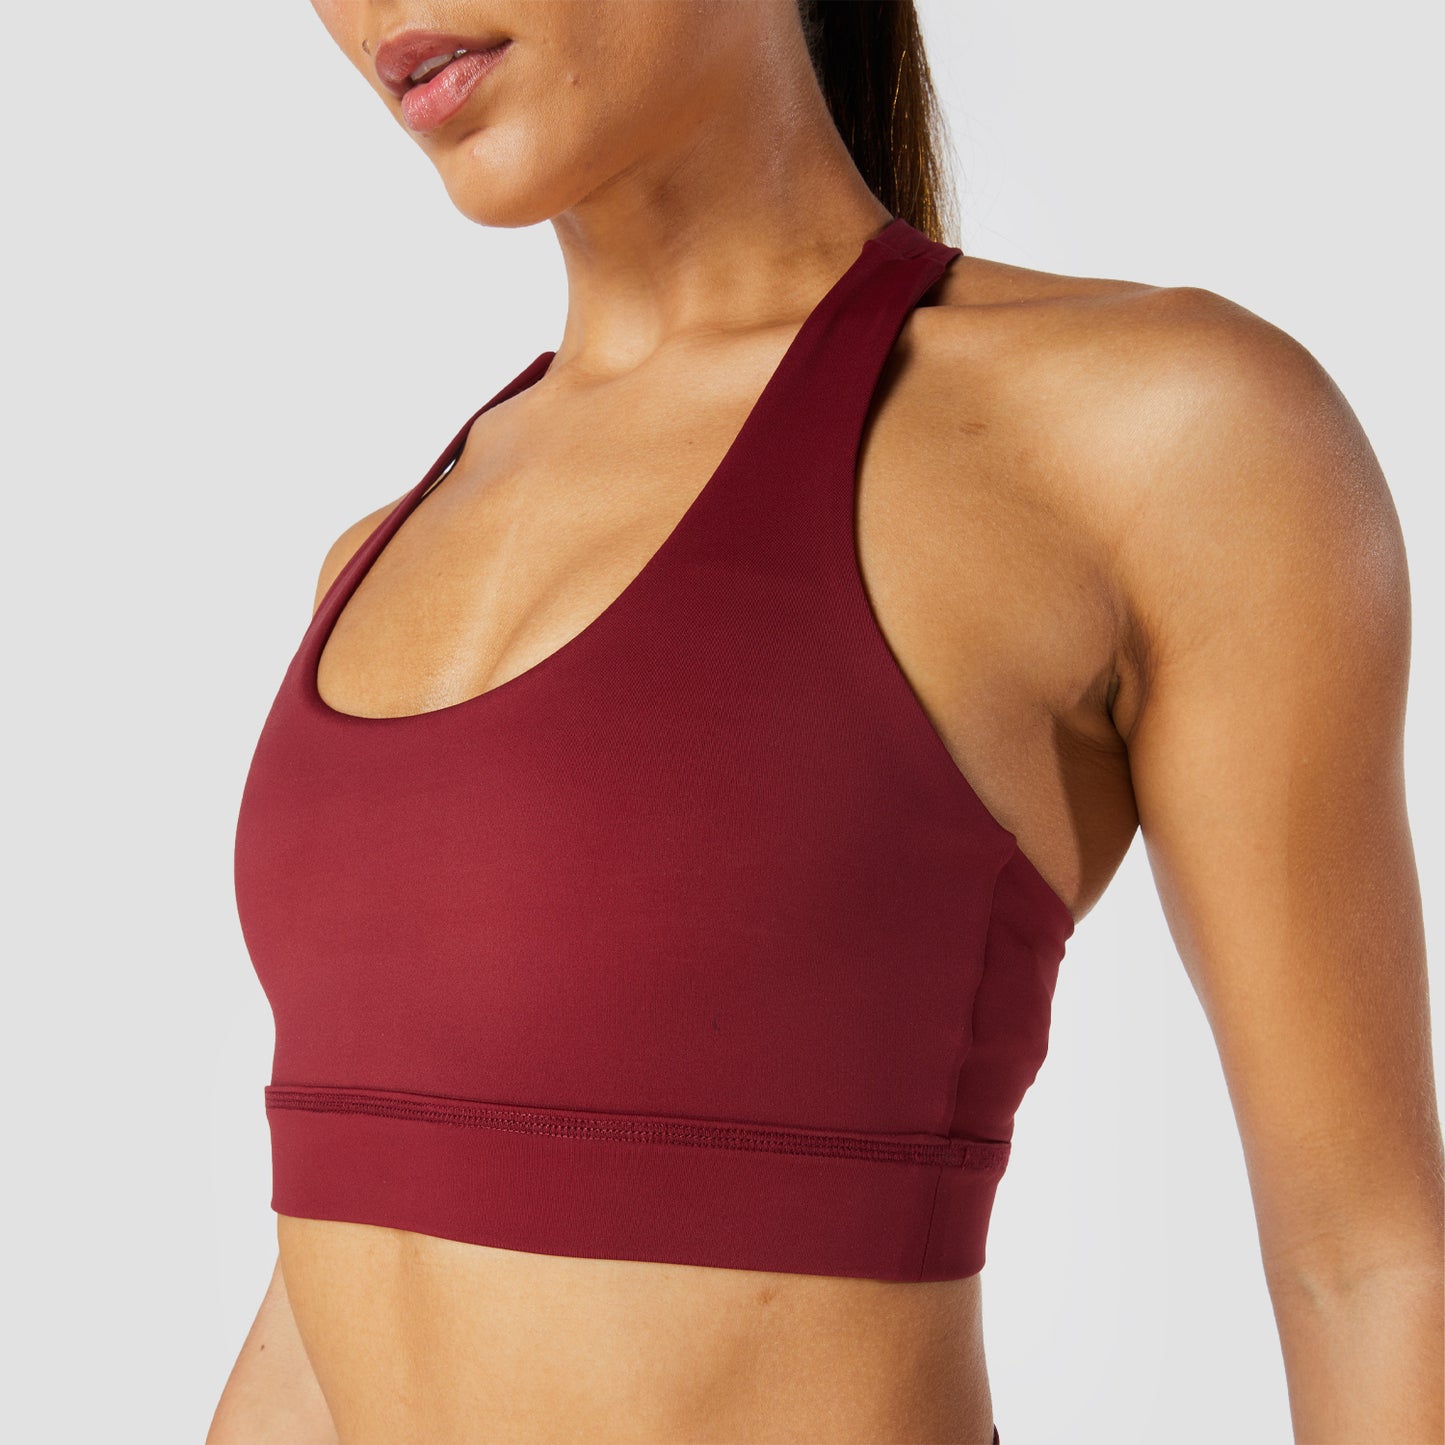 squatwolf-workout-clothes-core-agile-bra-red-sports-bra-for-gym